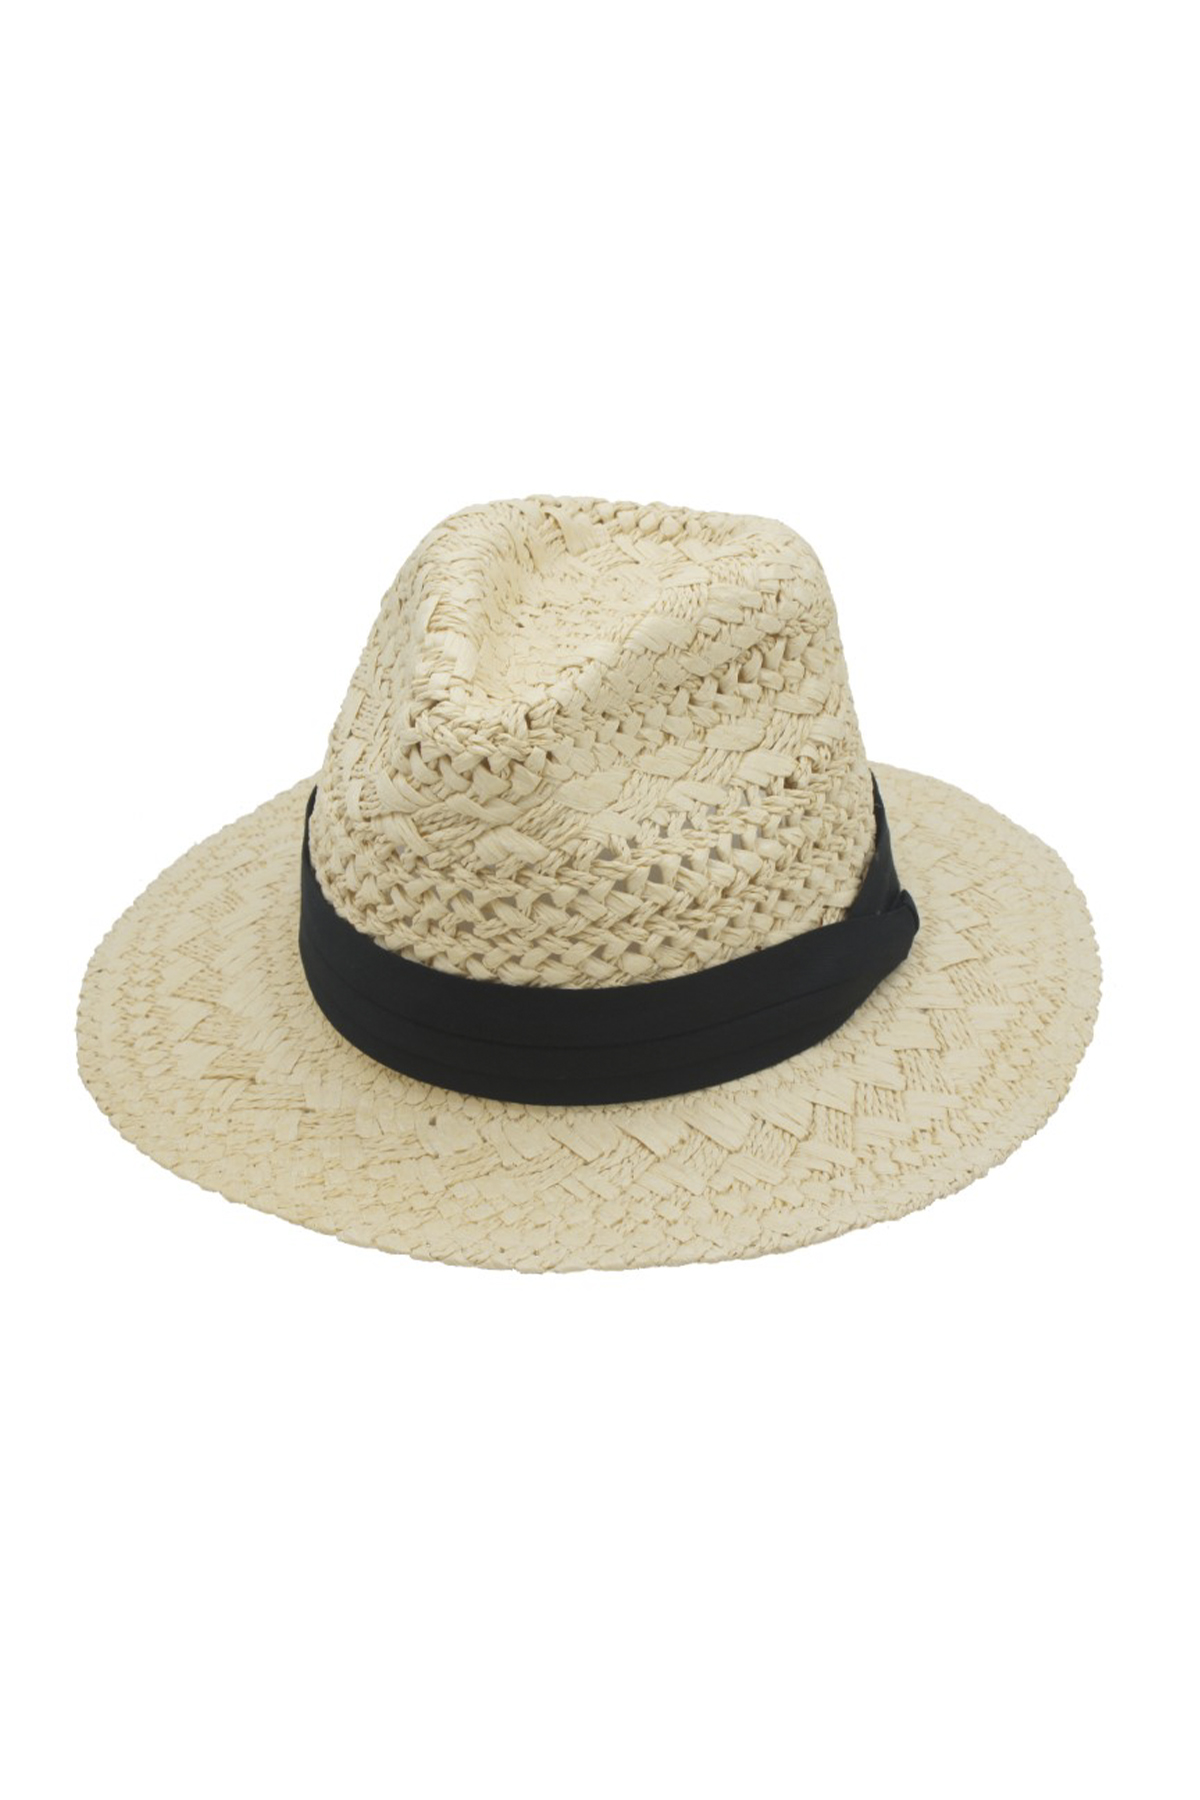 PATTERENED WEAVE BANDED WB STRAW FEDORA